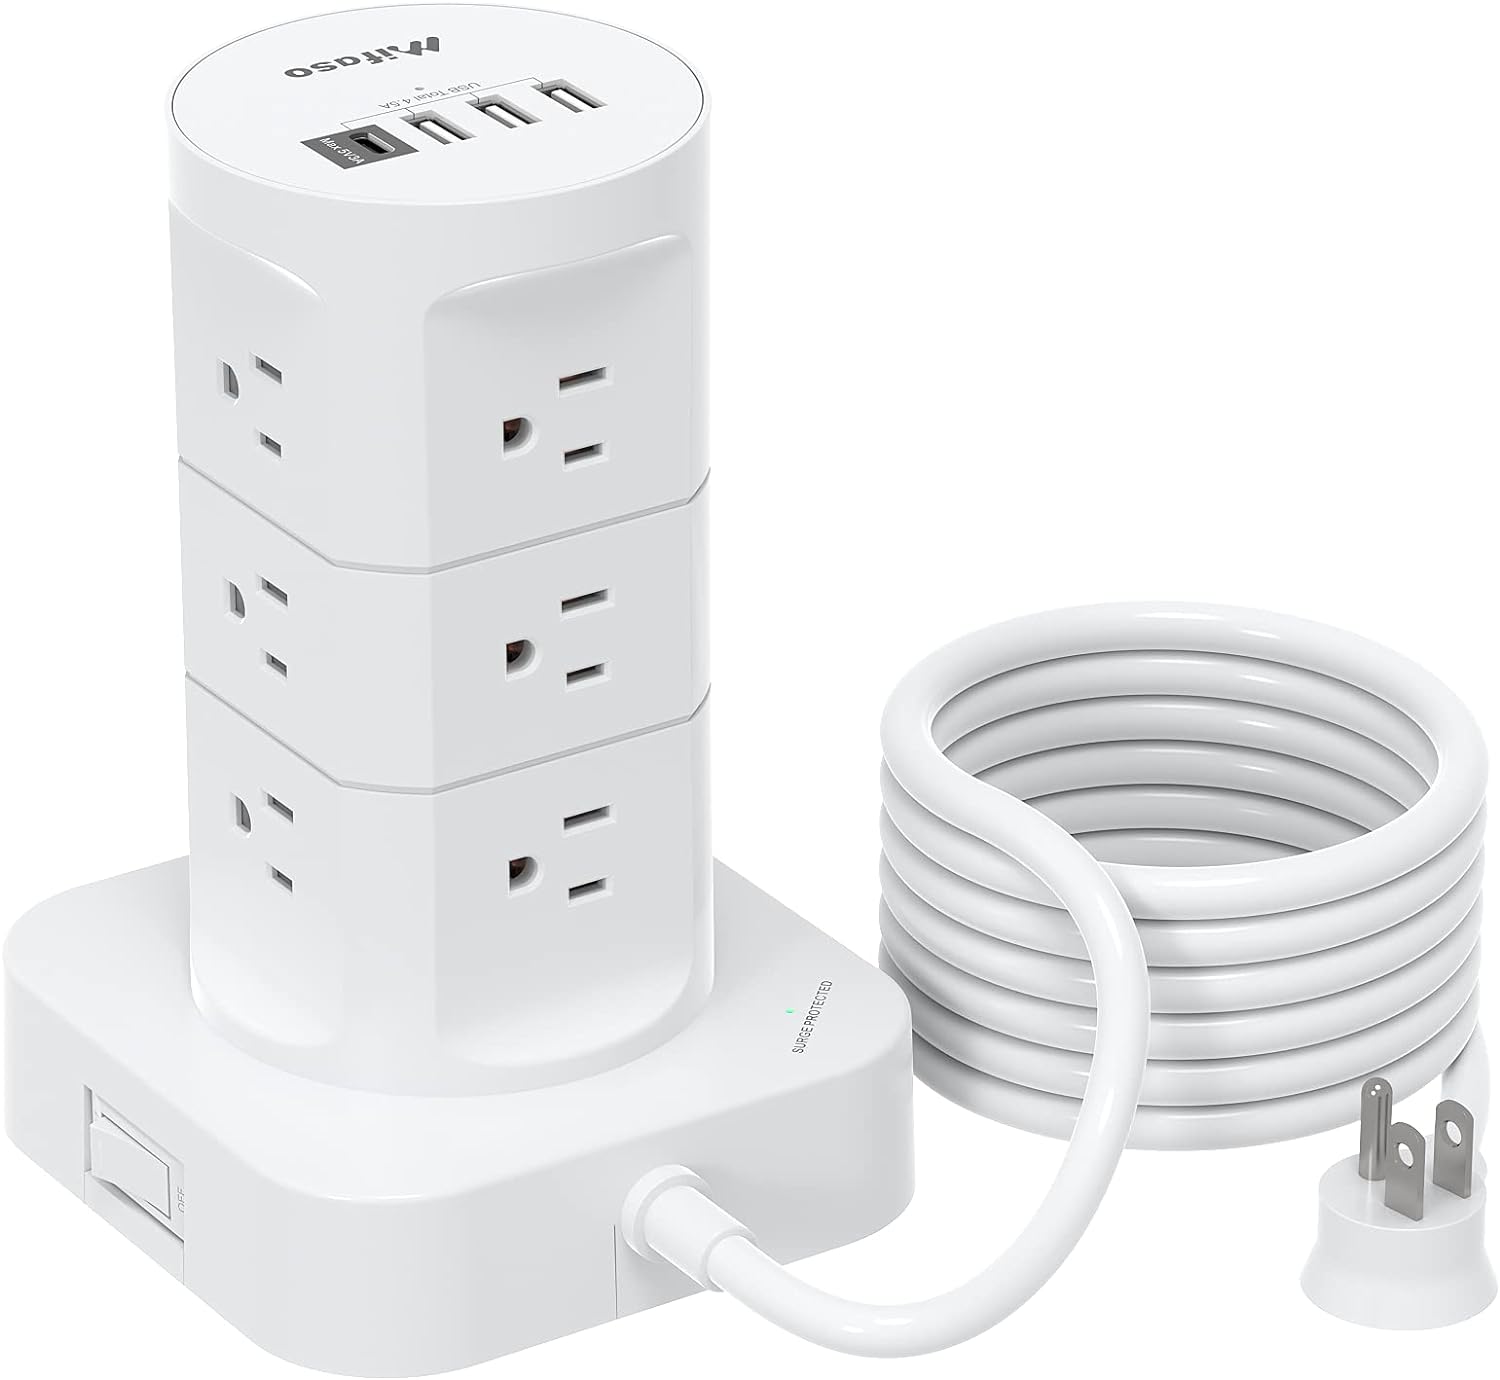 Surge Protector Power Strip Tower - 12 Widely Outlets with 4 USB Ports (1 USB C), 6FT Heavy Duty Extension Cord, Flat Multi Plug Outlet Extender Overload Protection for Home Office